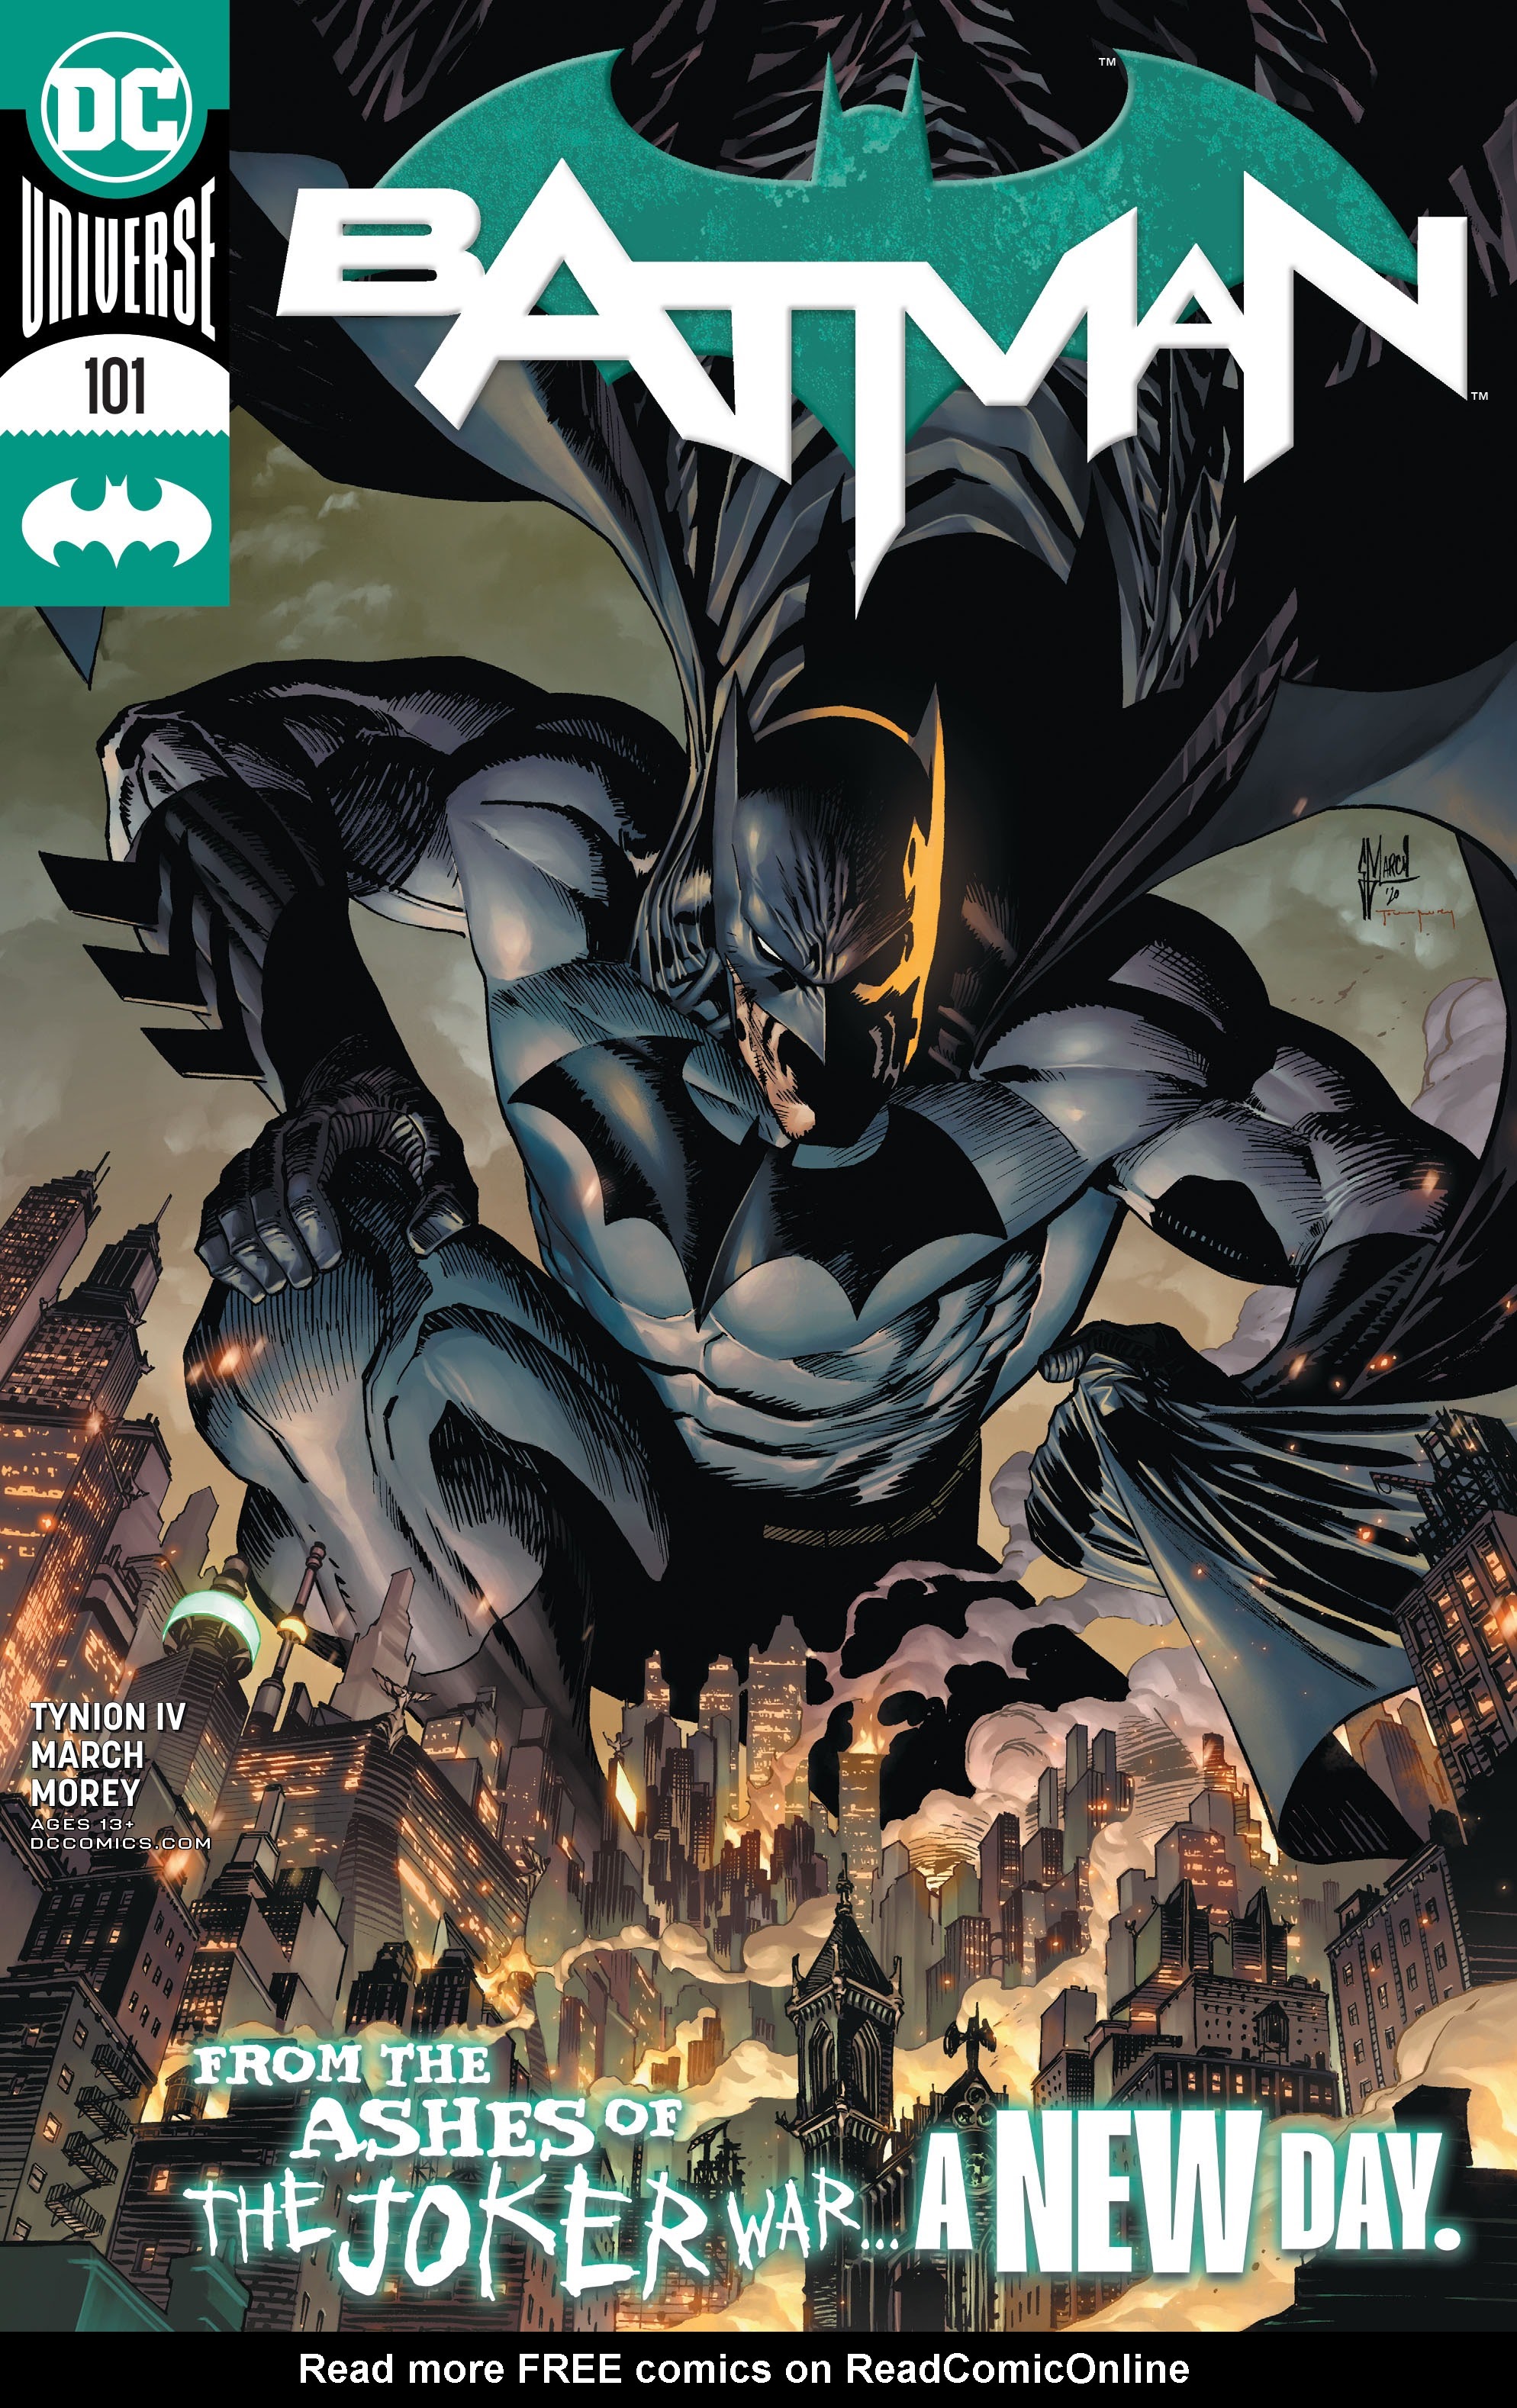 Batman 2016 Issue 101 | Read Batman 2016 Issue 101 comic online in high  quality. Read Full Comic online for free - Read comics online in high  quality .| READ COMIC ONLINE